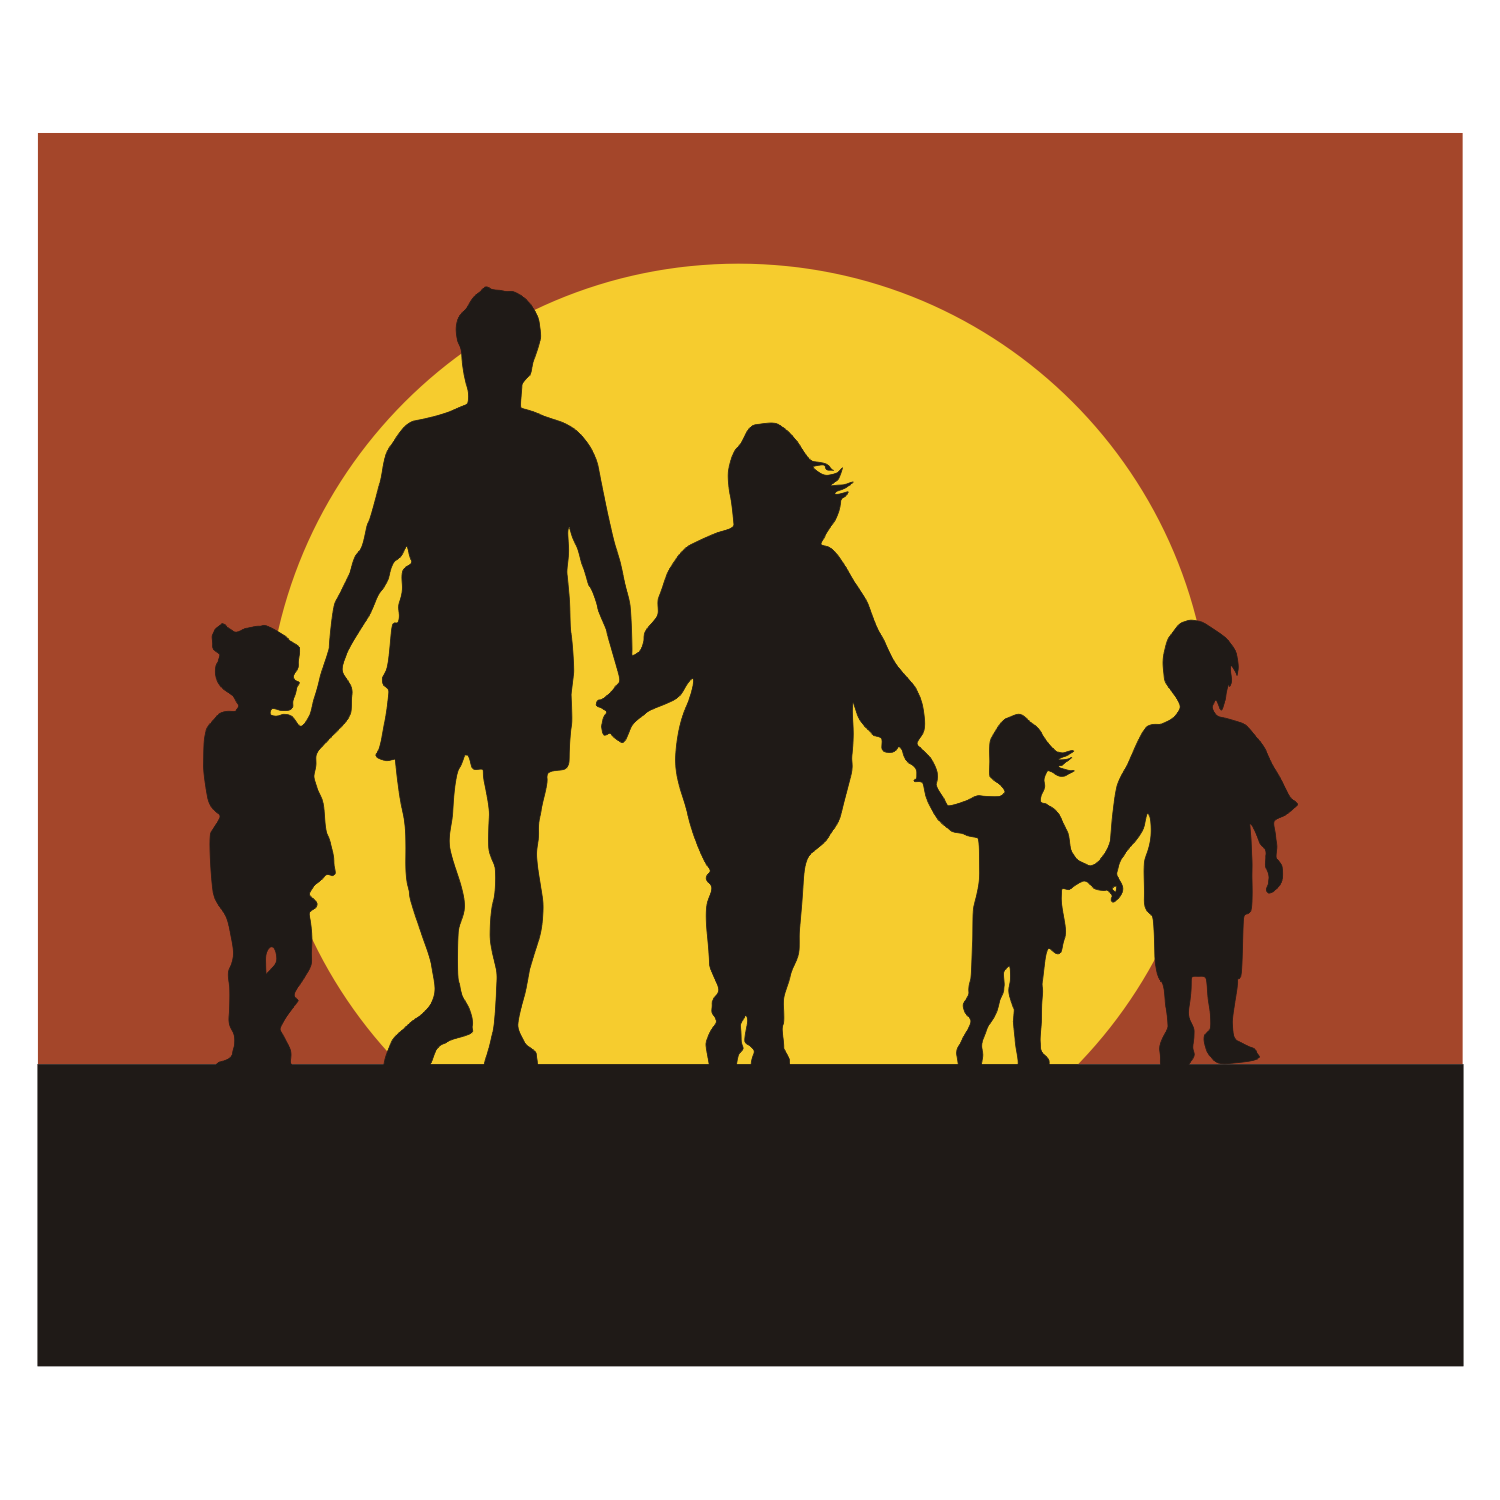 Free Vector Images of Families